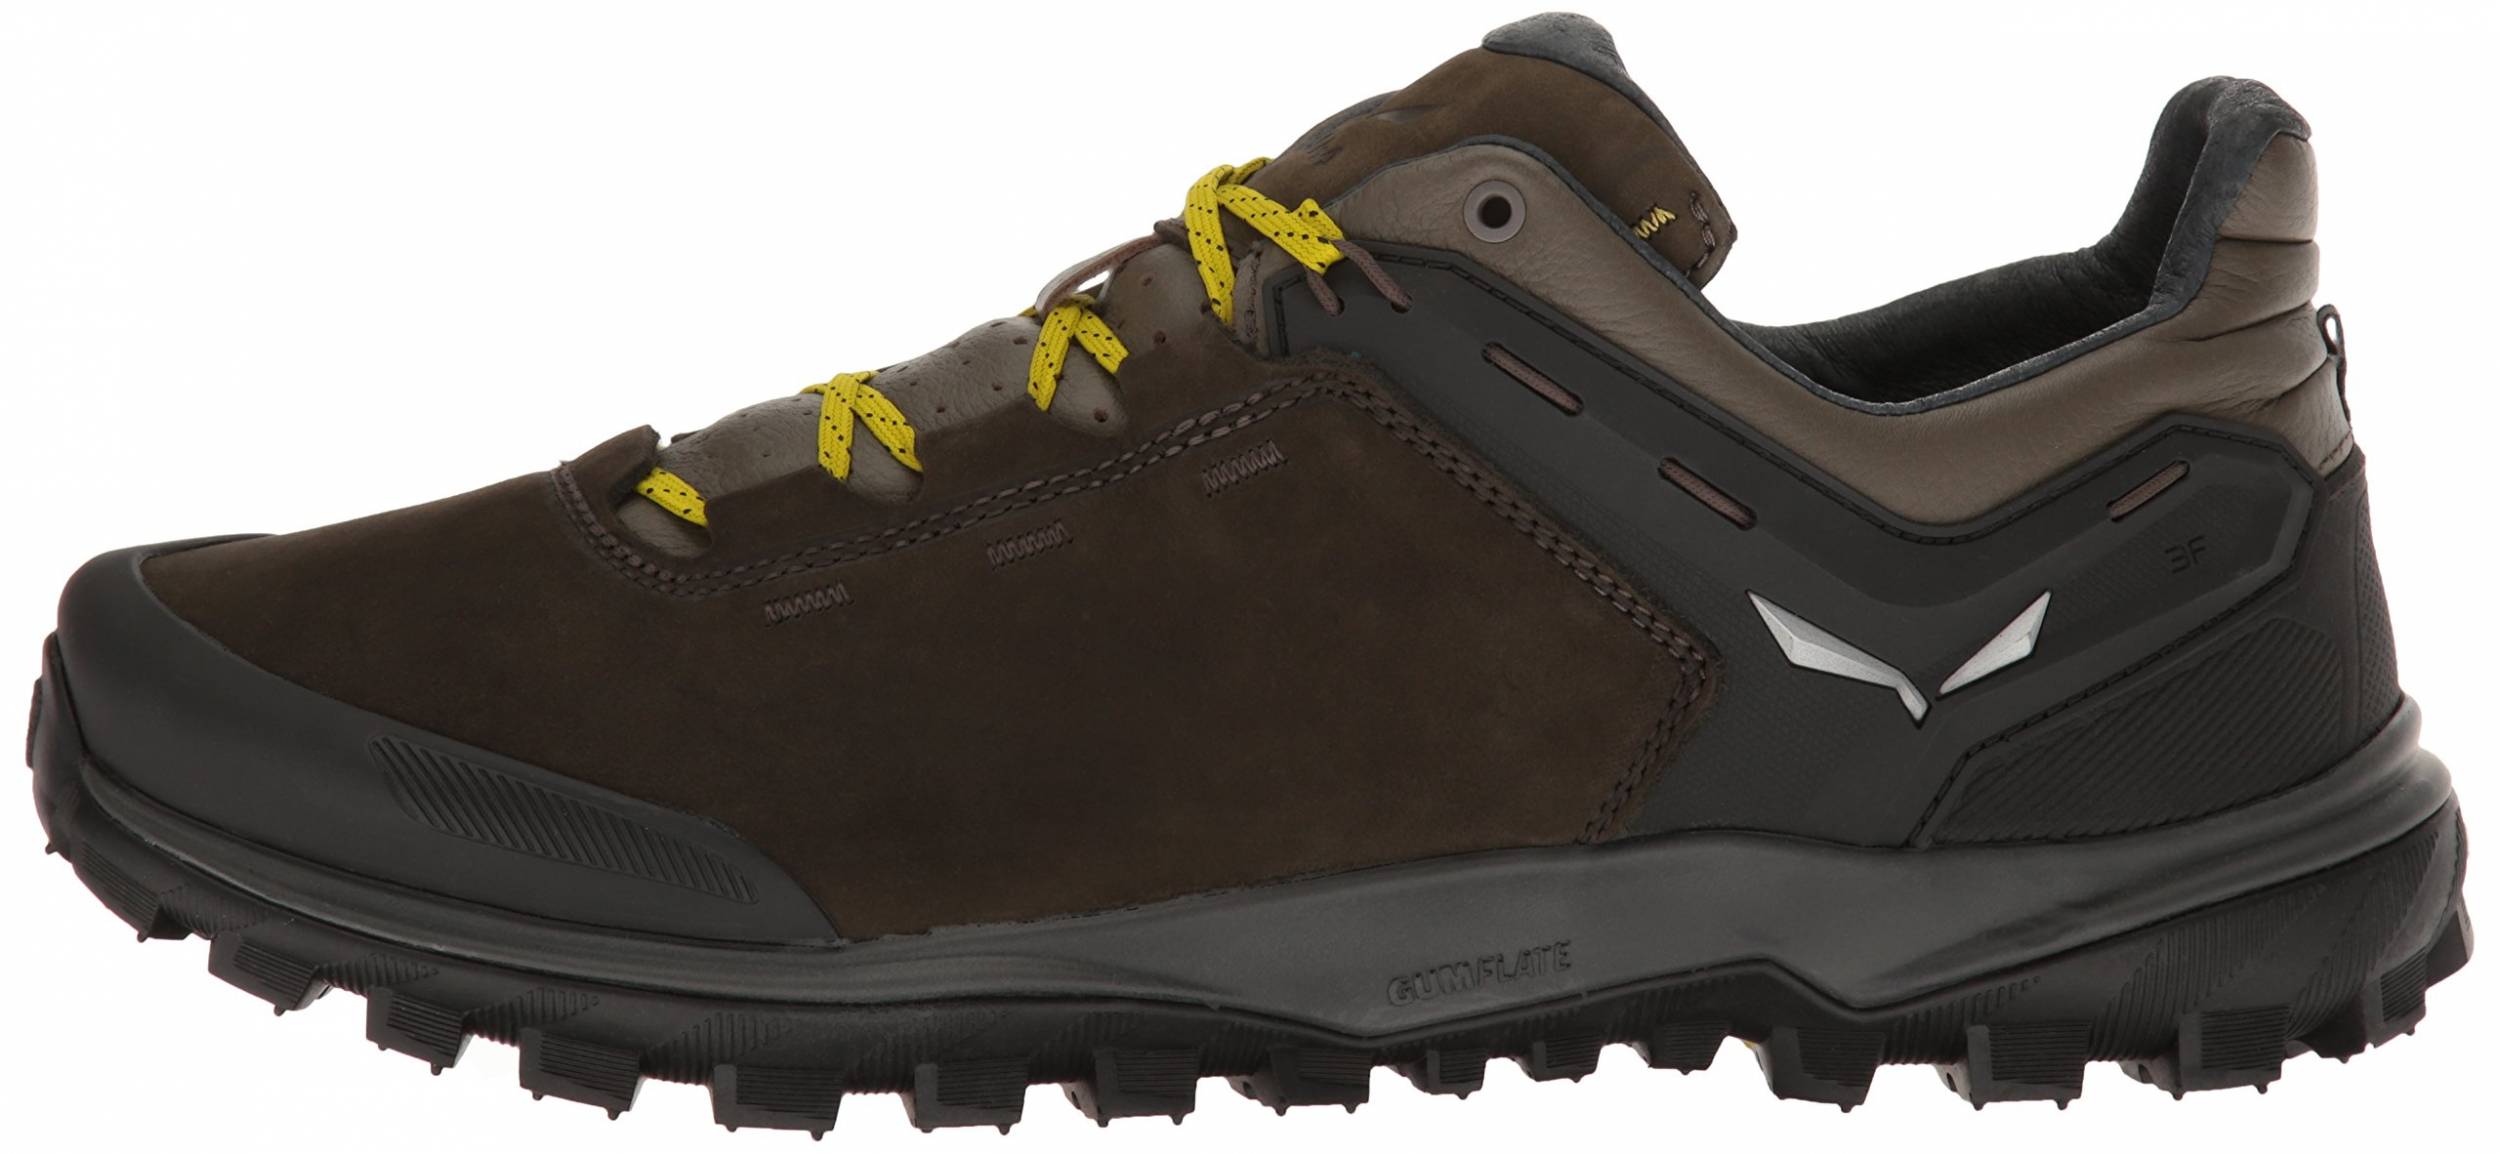 all leather hiking shoes